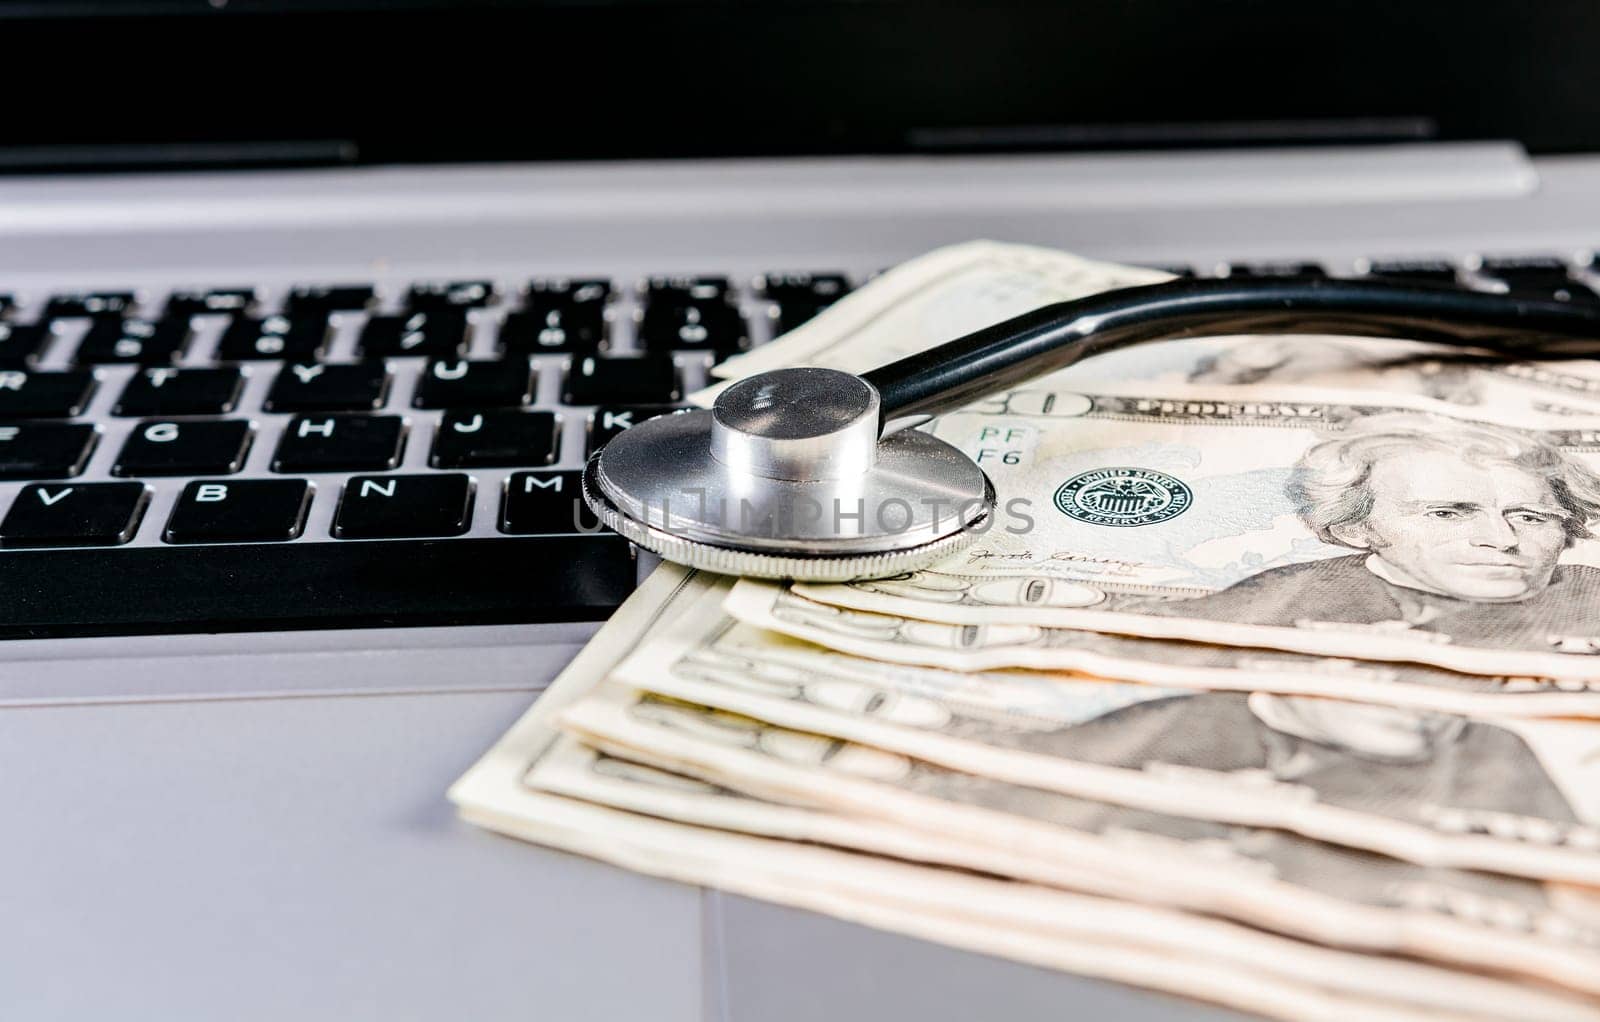 Stethoscope on top of money on laptop keyboard. Stethoscope on dollar bills on top of laptop keyboard by isaiphoto